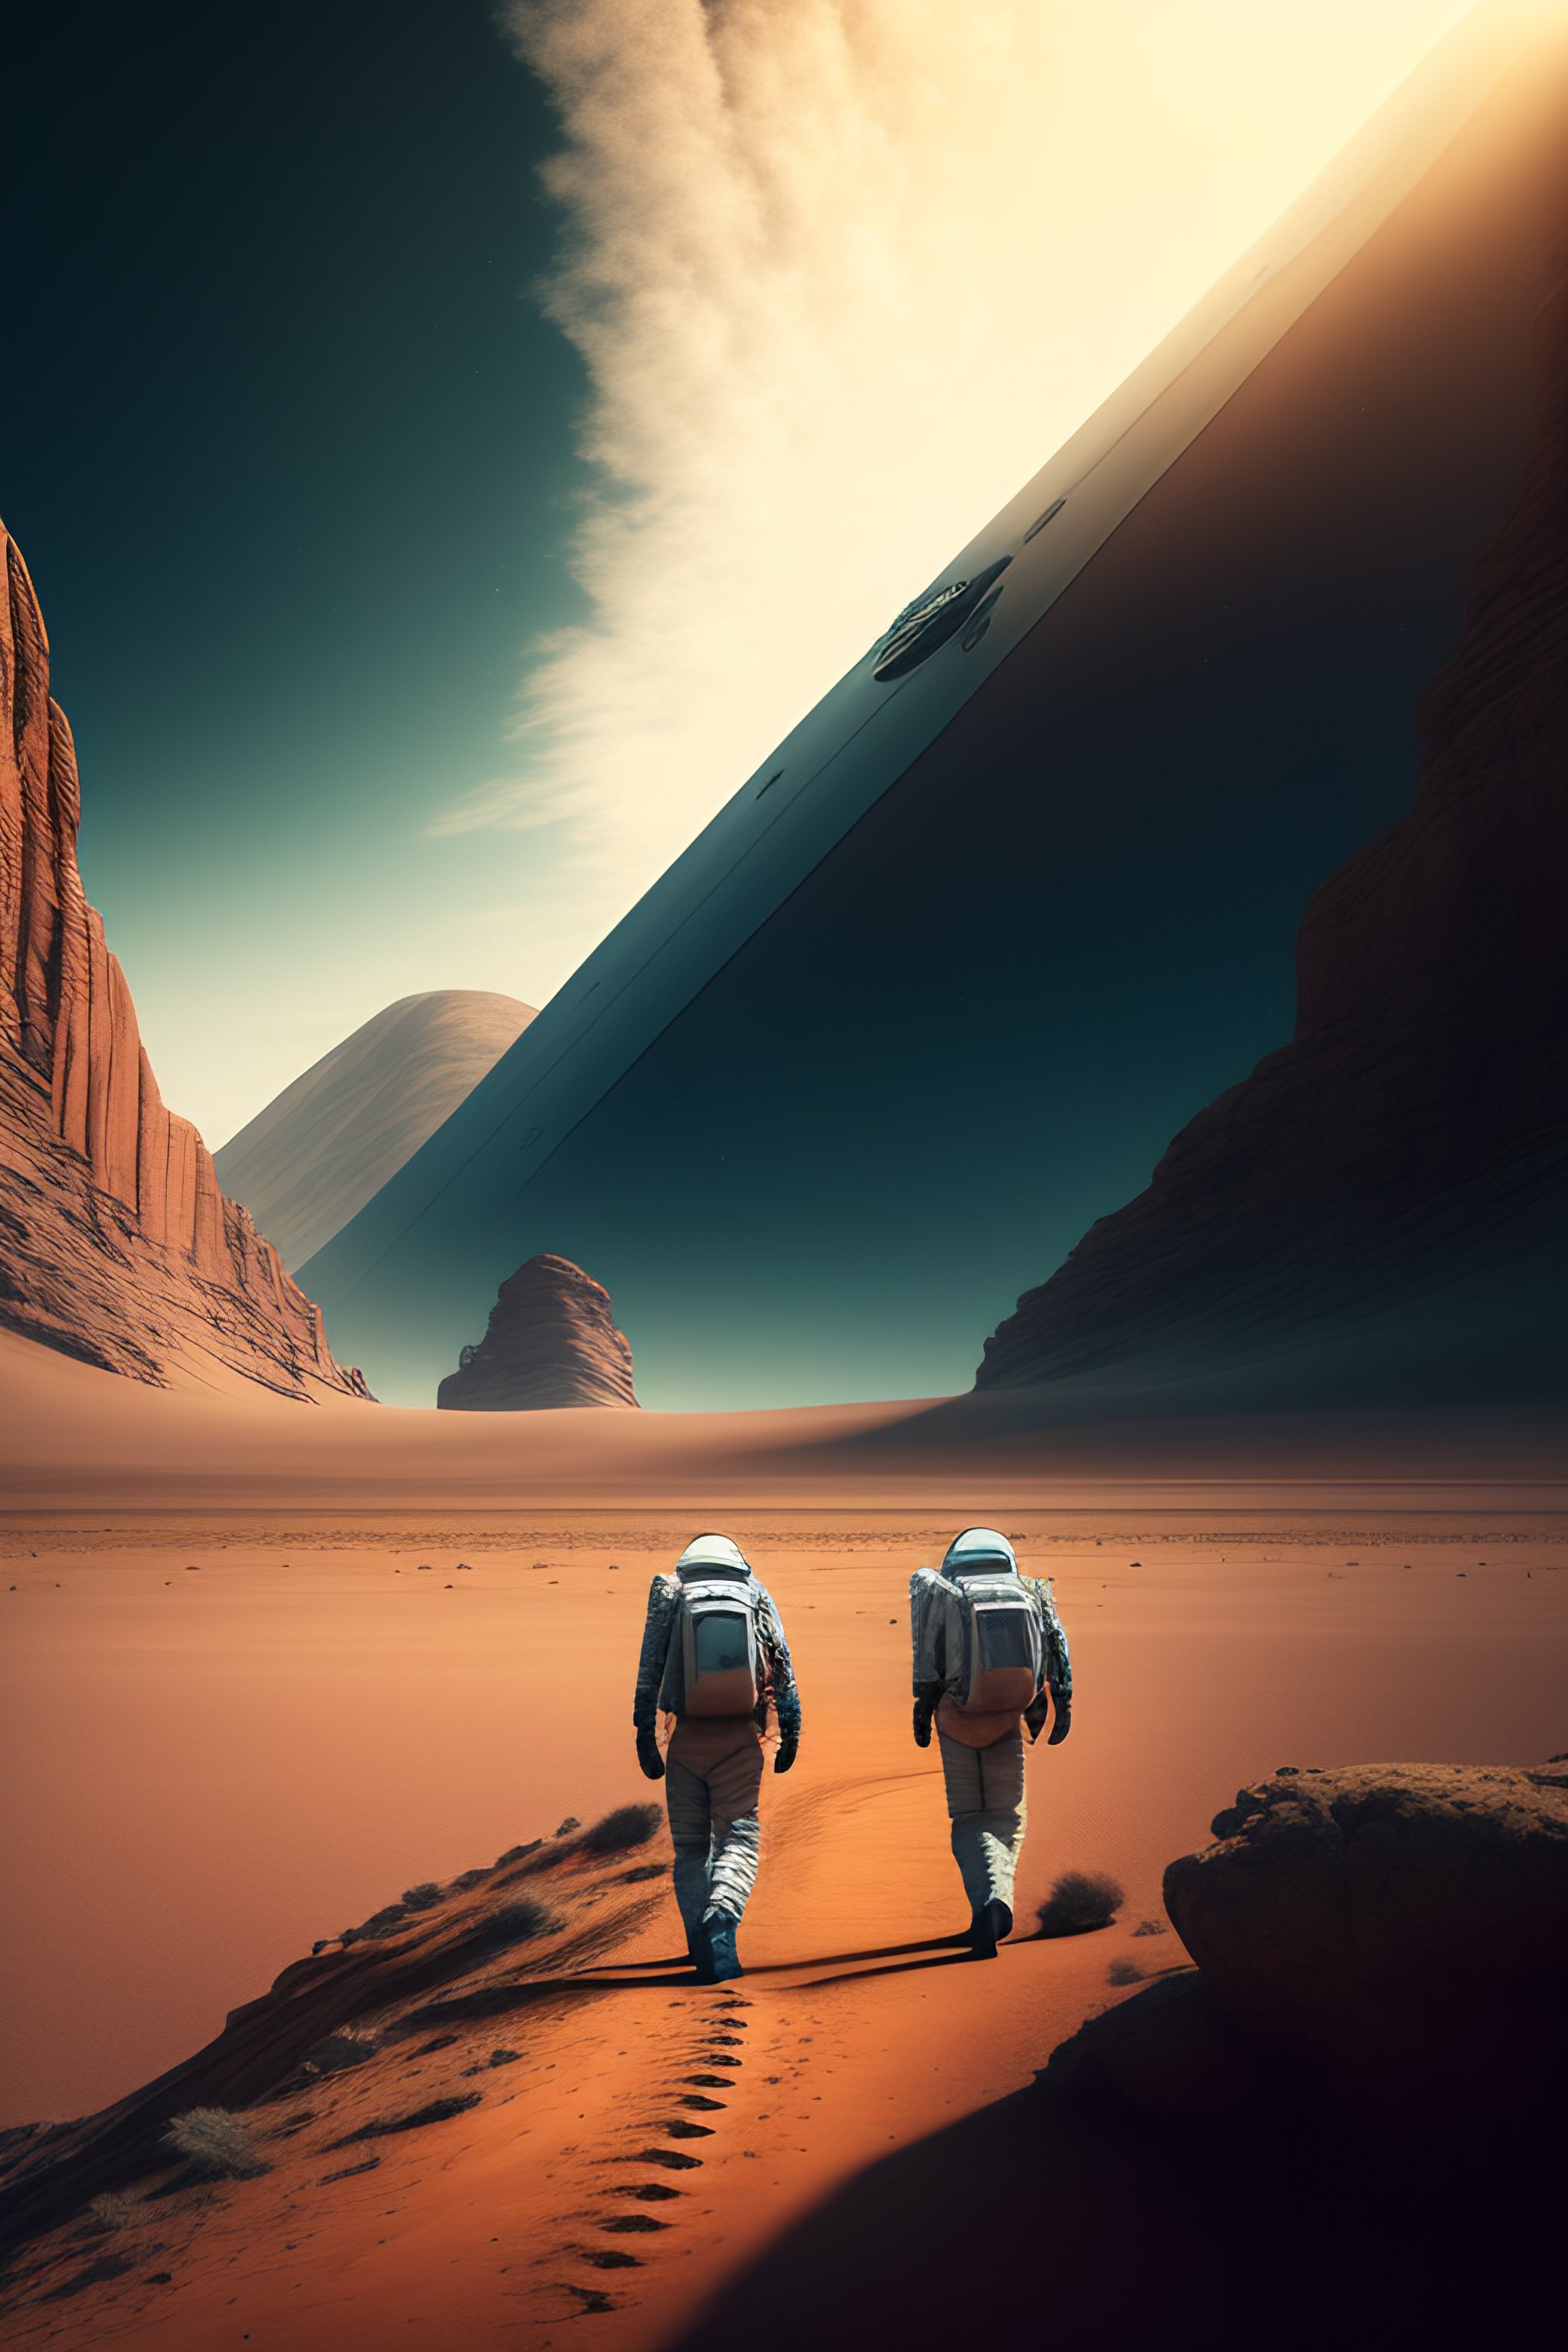 Image of two astronauts walking away on their path